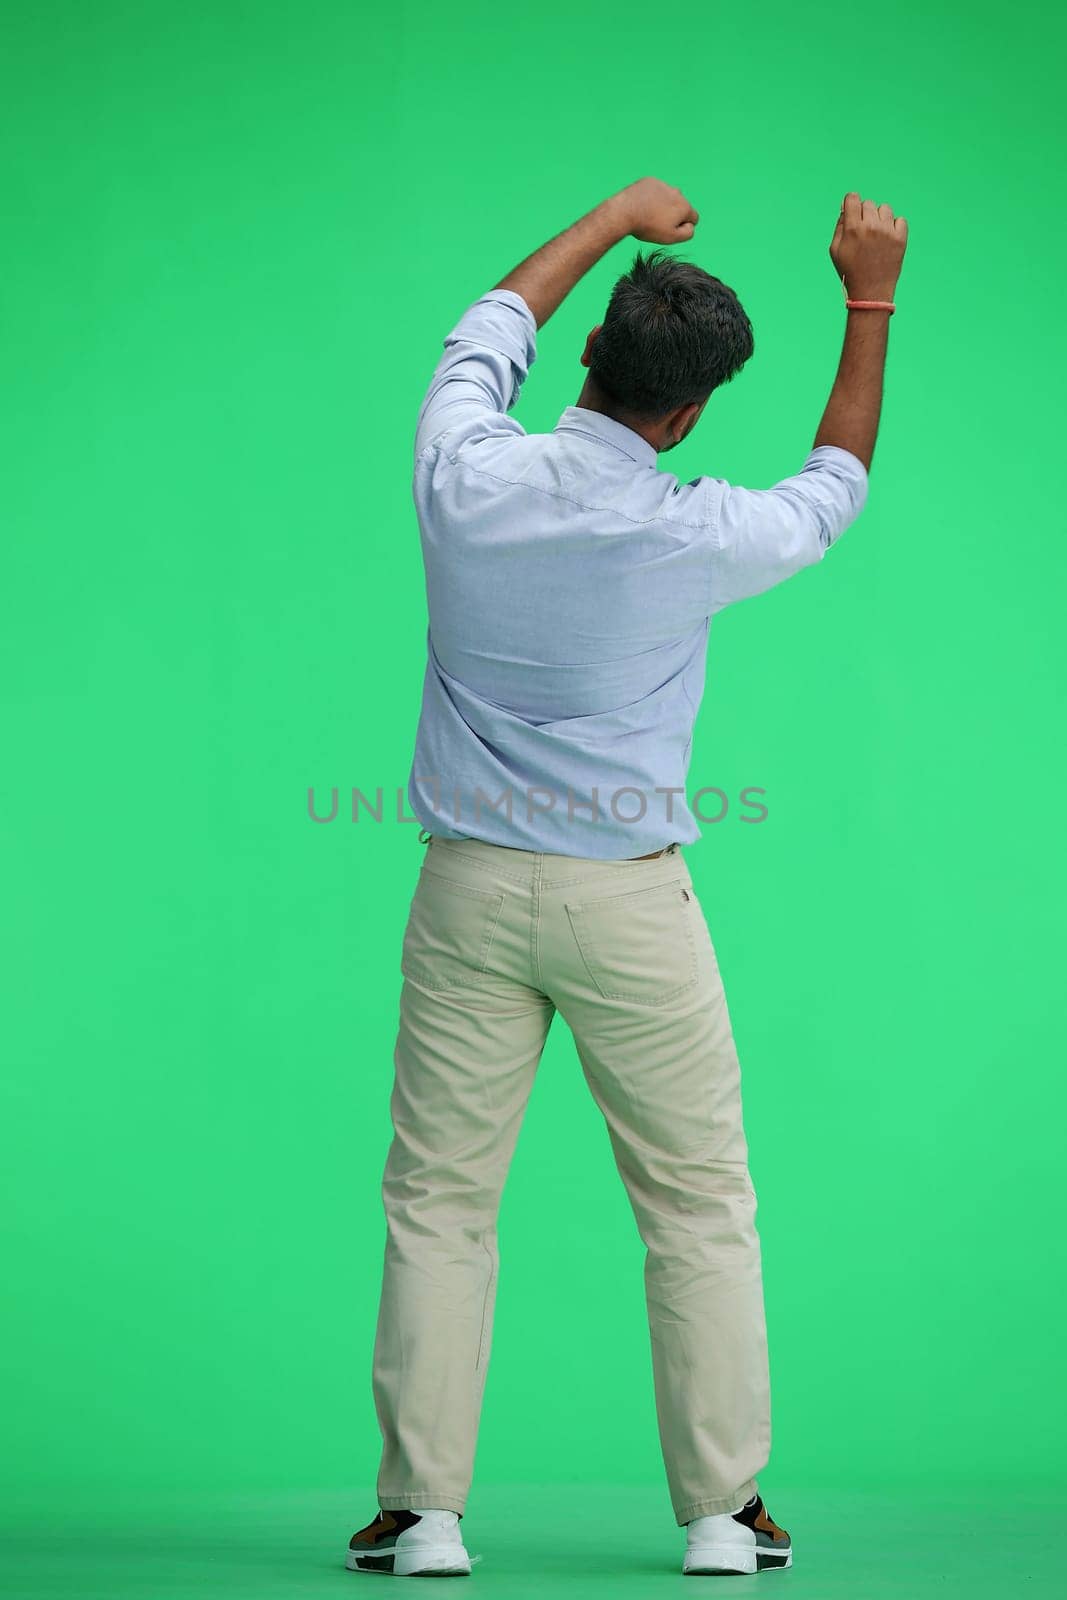 A man in a blue shirt, on a green background, standing tall, waving his arms, back view.